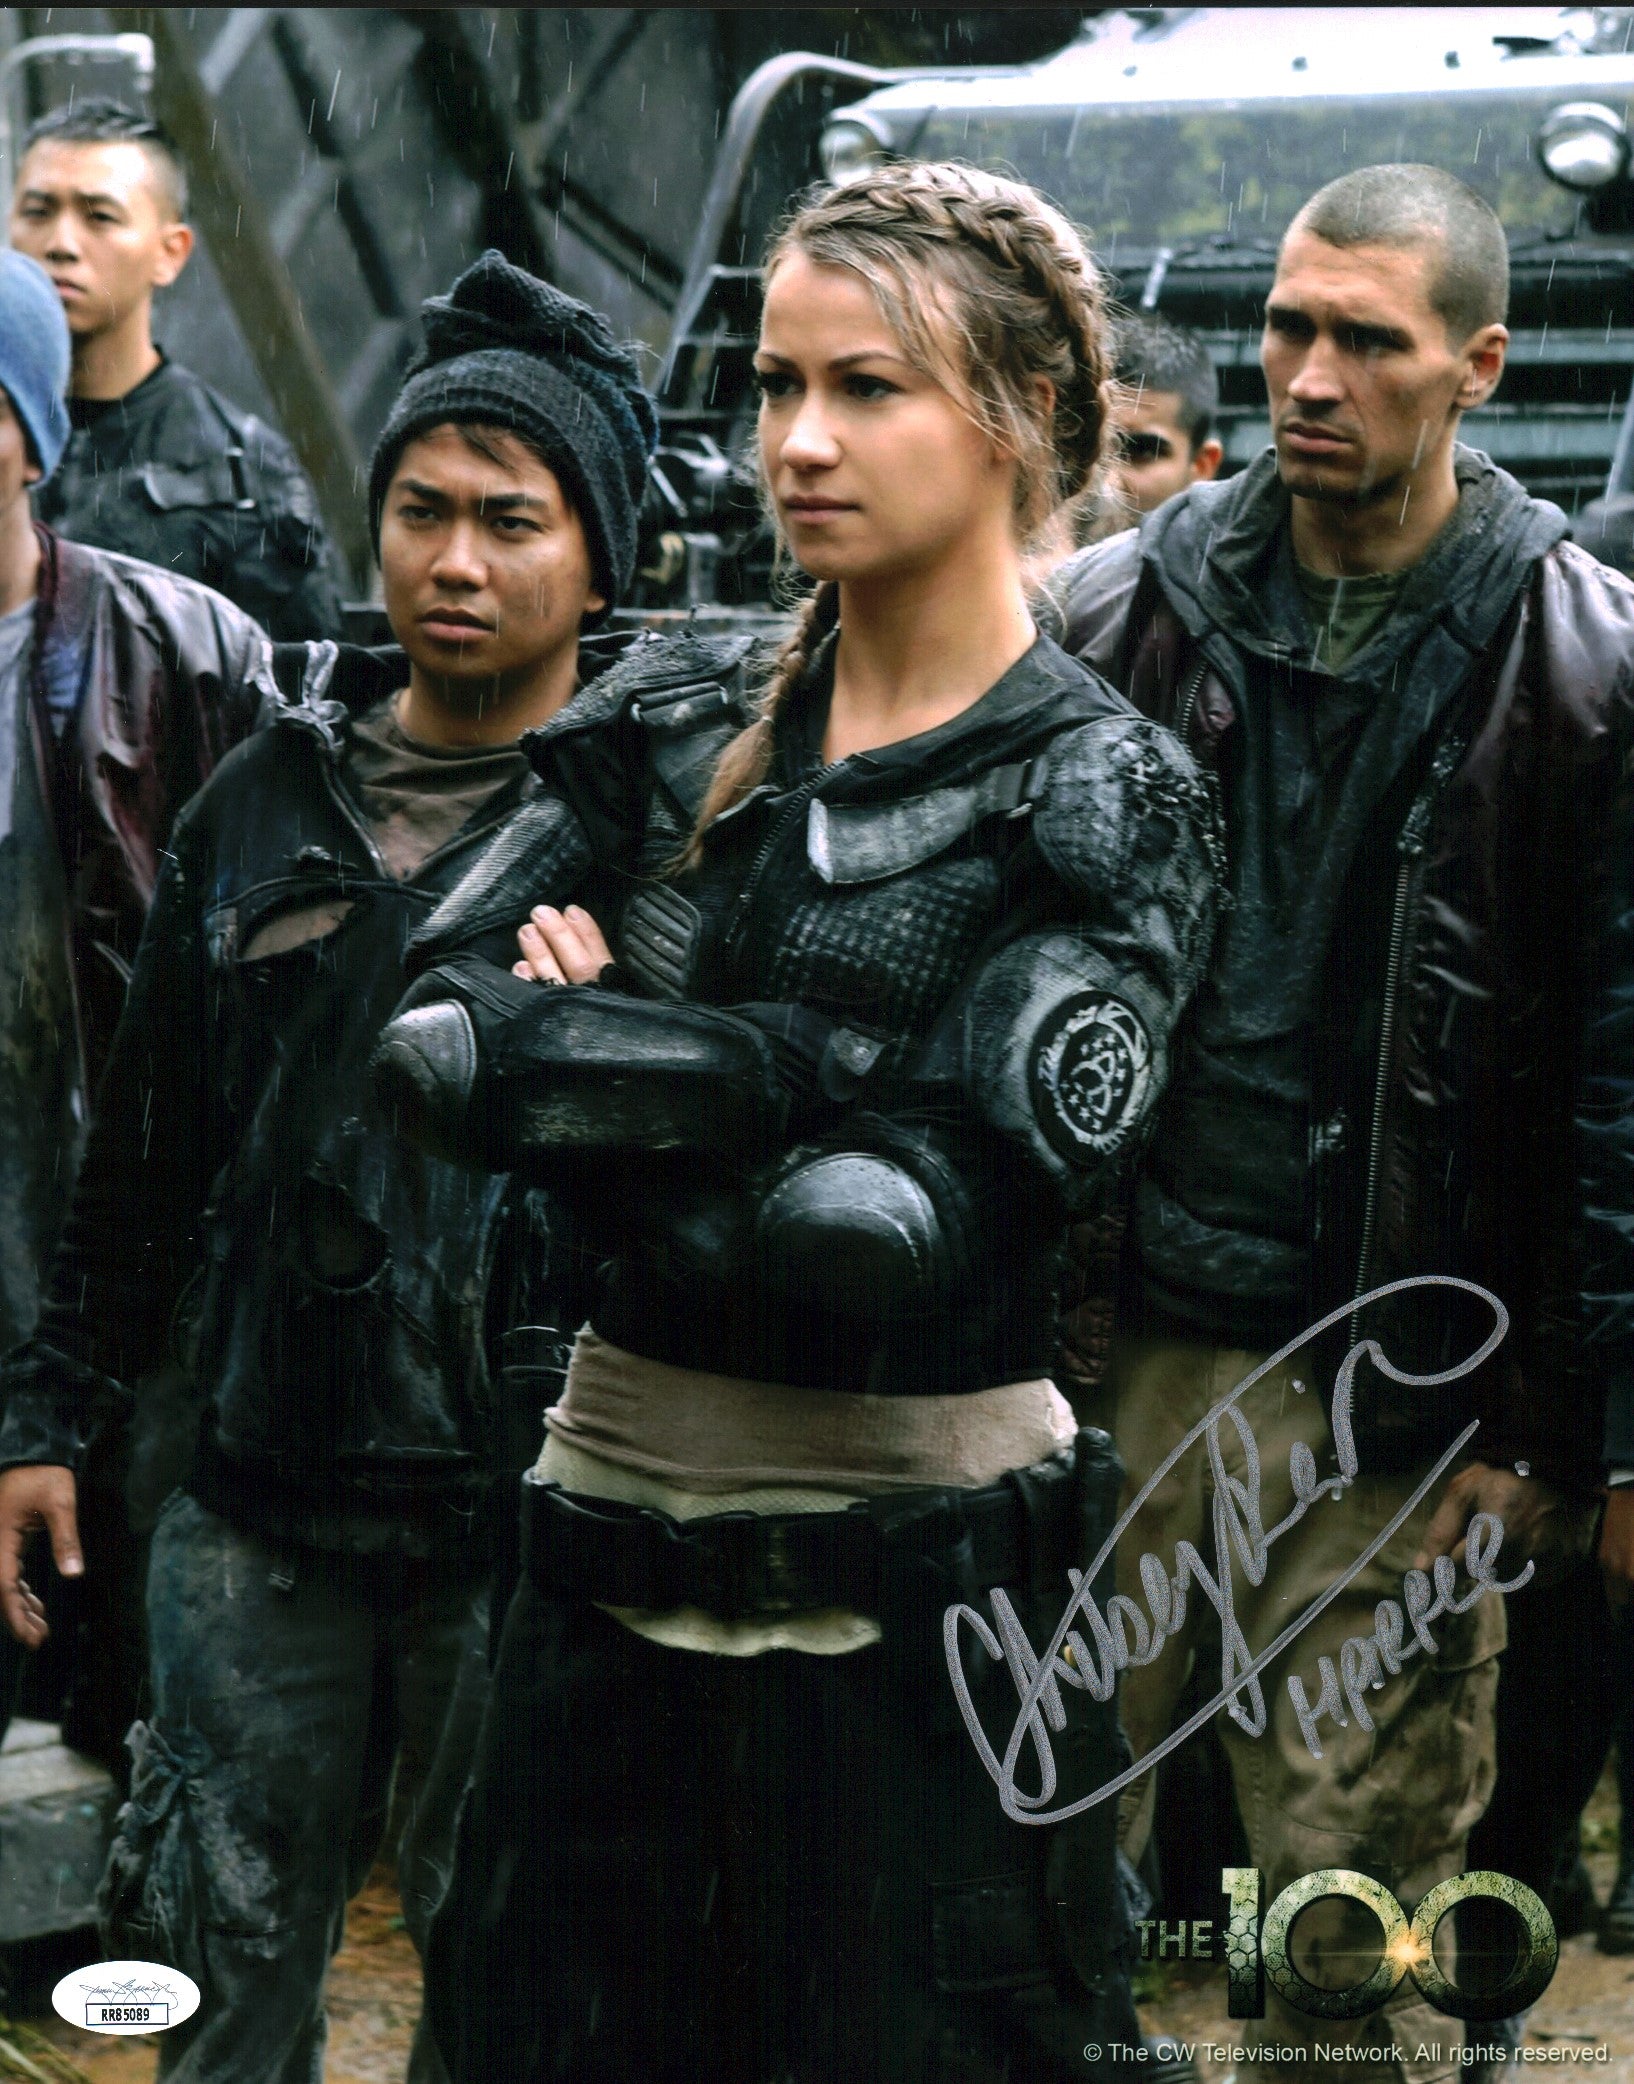 Chelsea Reist The 100 11x14 Signed Photo Poster JSA Certified Autograph